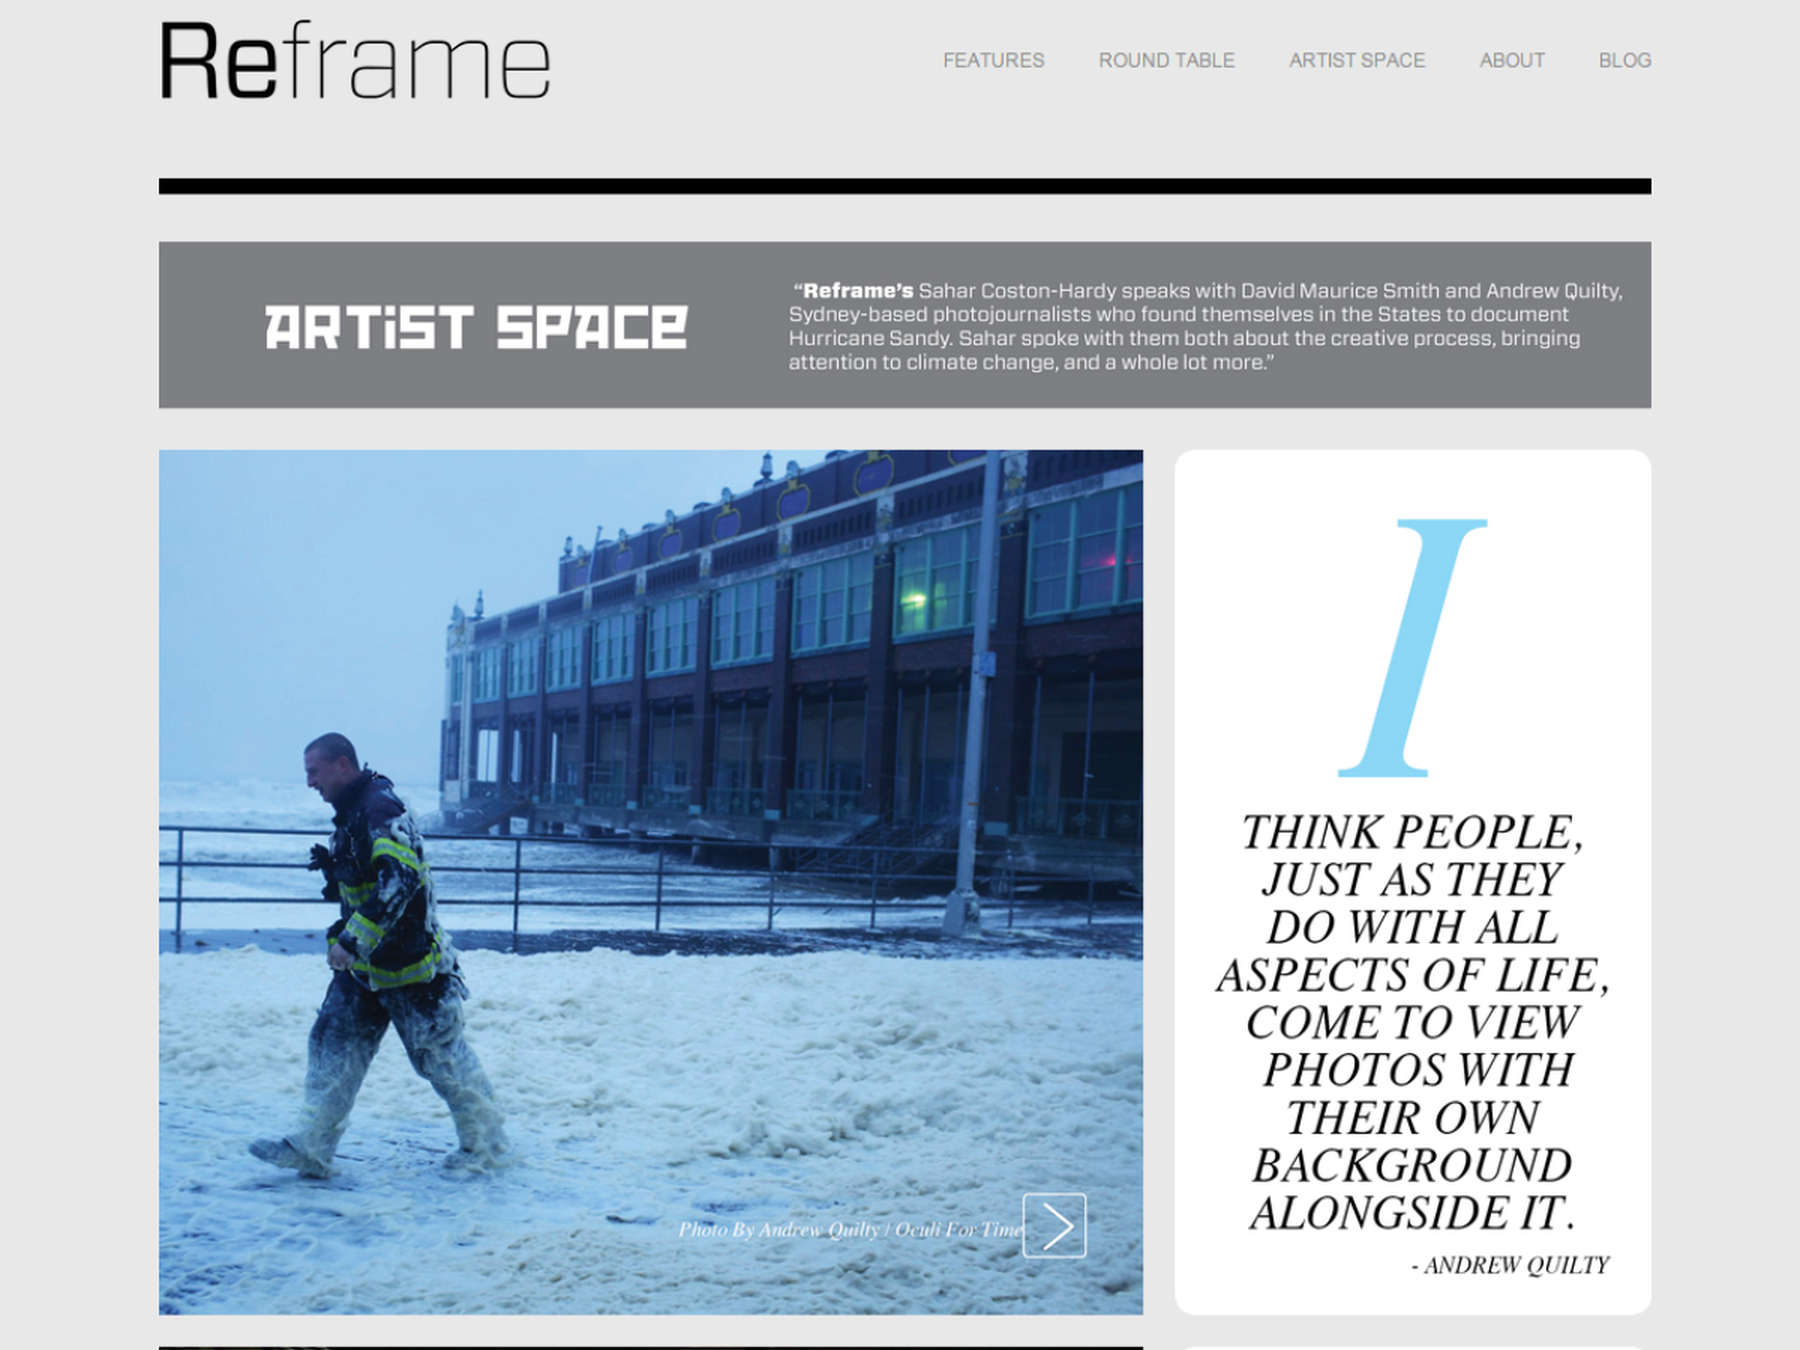 The Artist Space section of Reframe, interviewing two photographers who captured Hurricane Sandy's devastation.